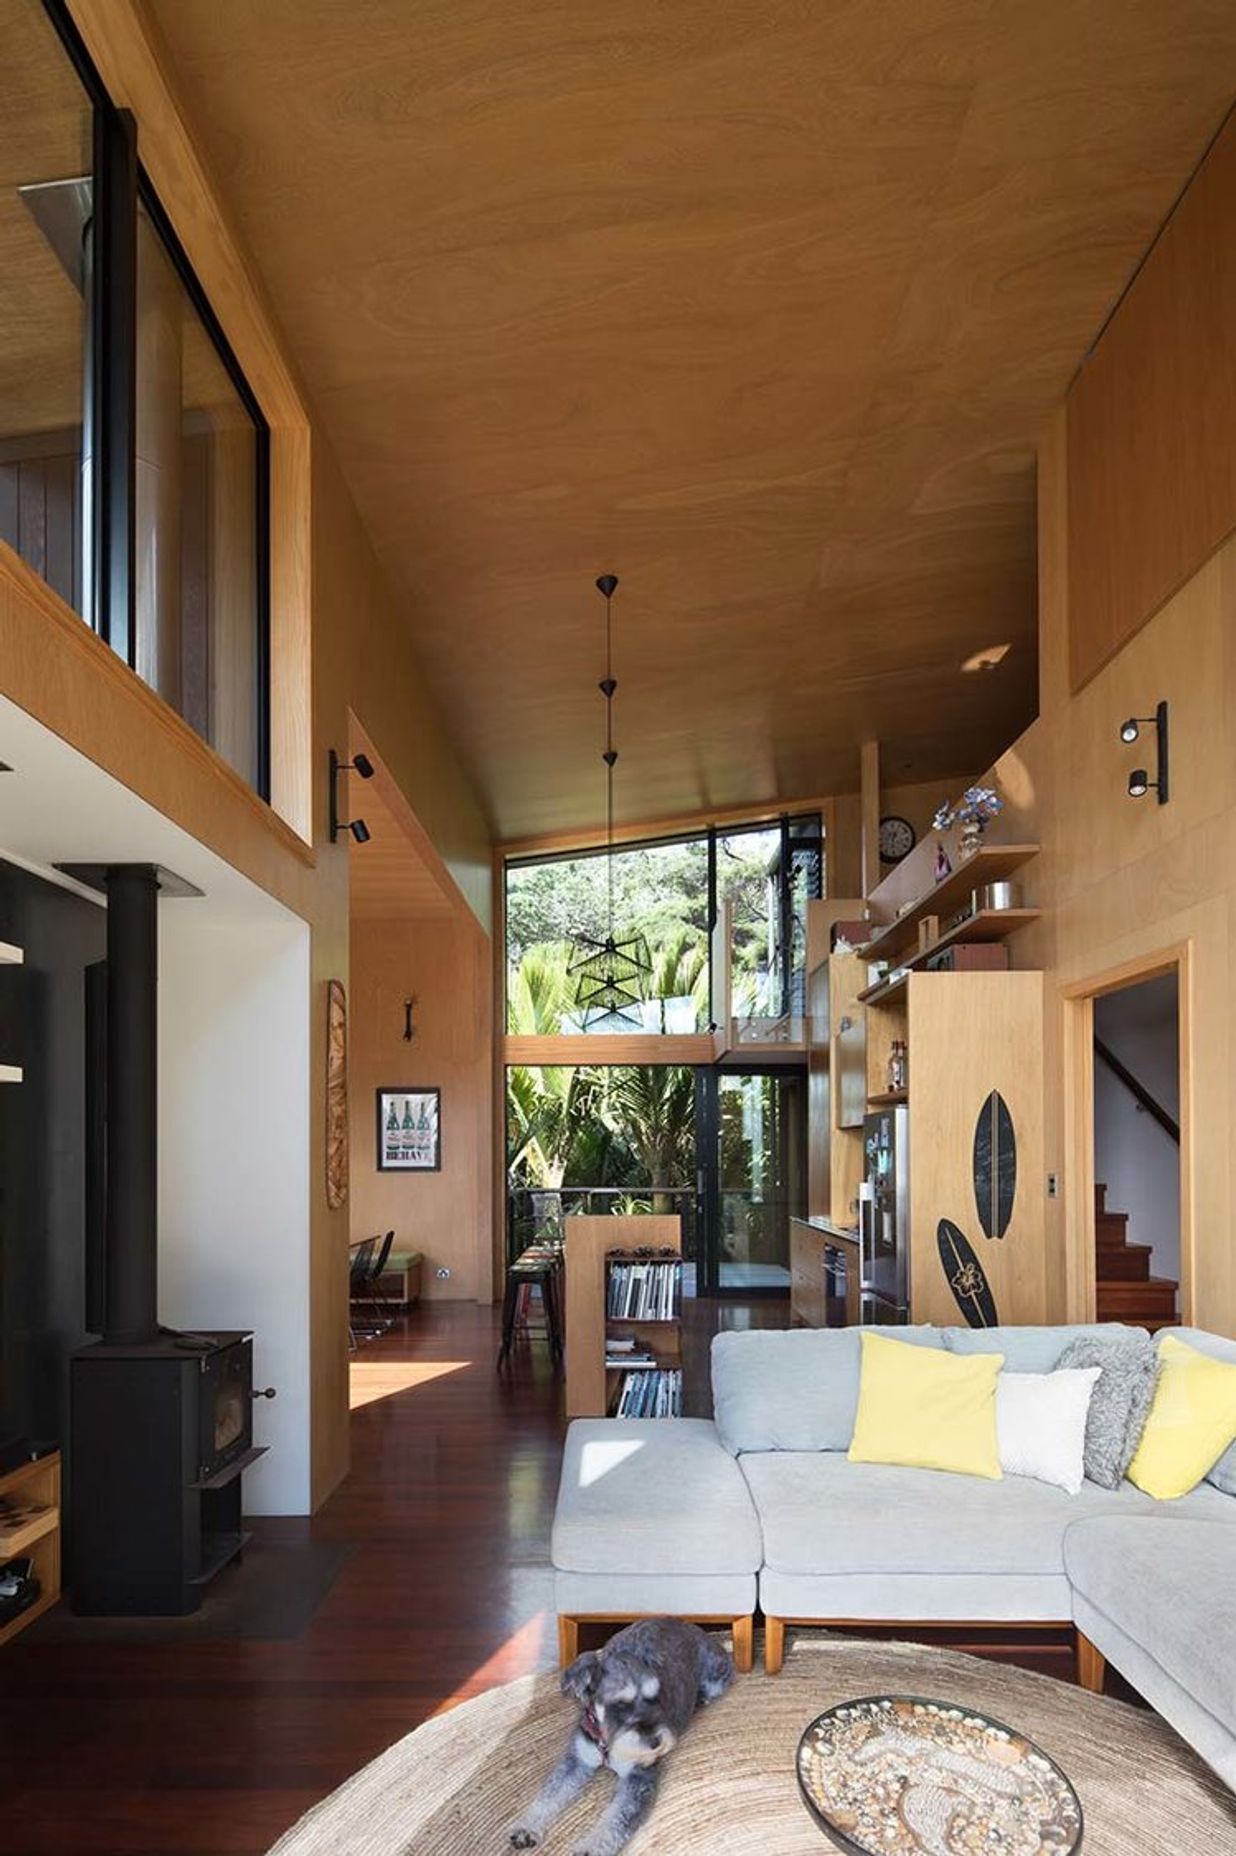 The high ceilings comfortably provide several living spaces within the small footprint, promoting social closeness that larger houses may not.